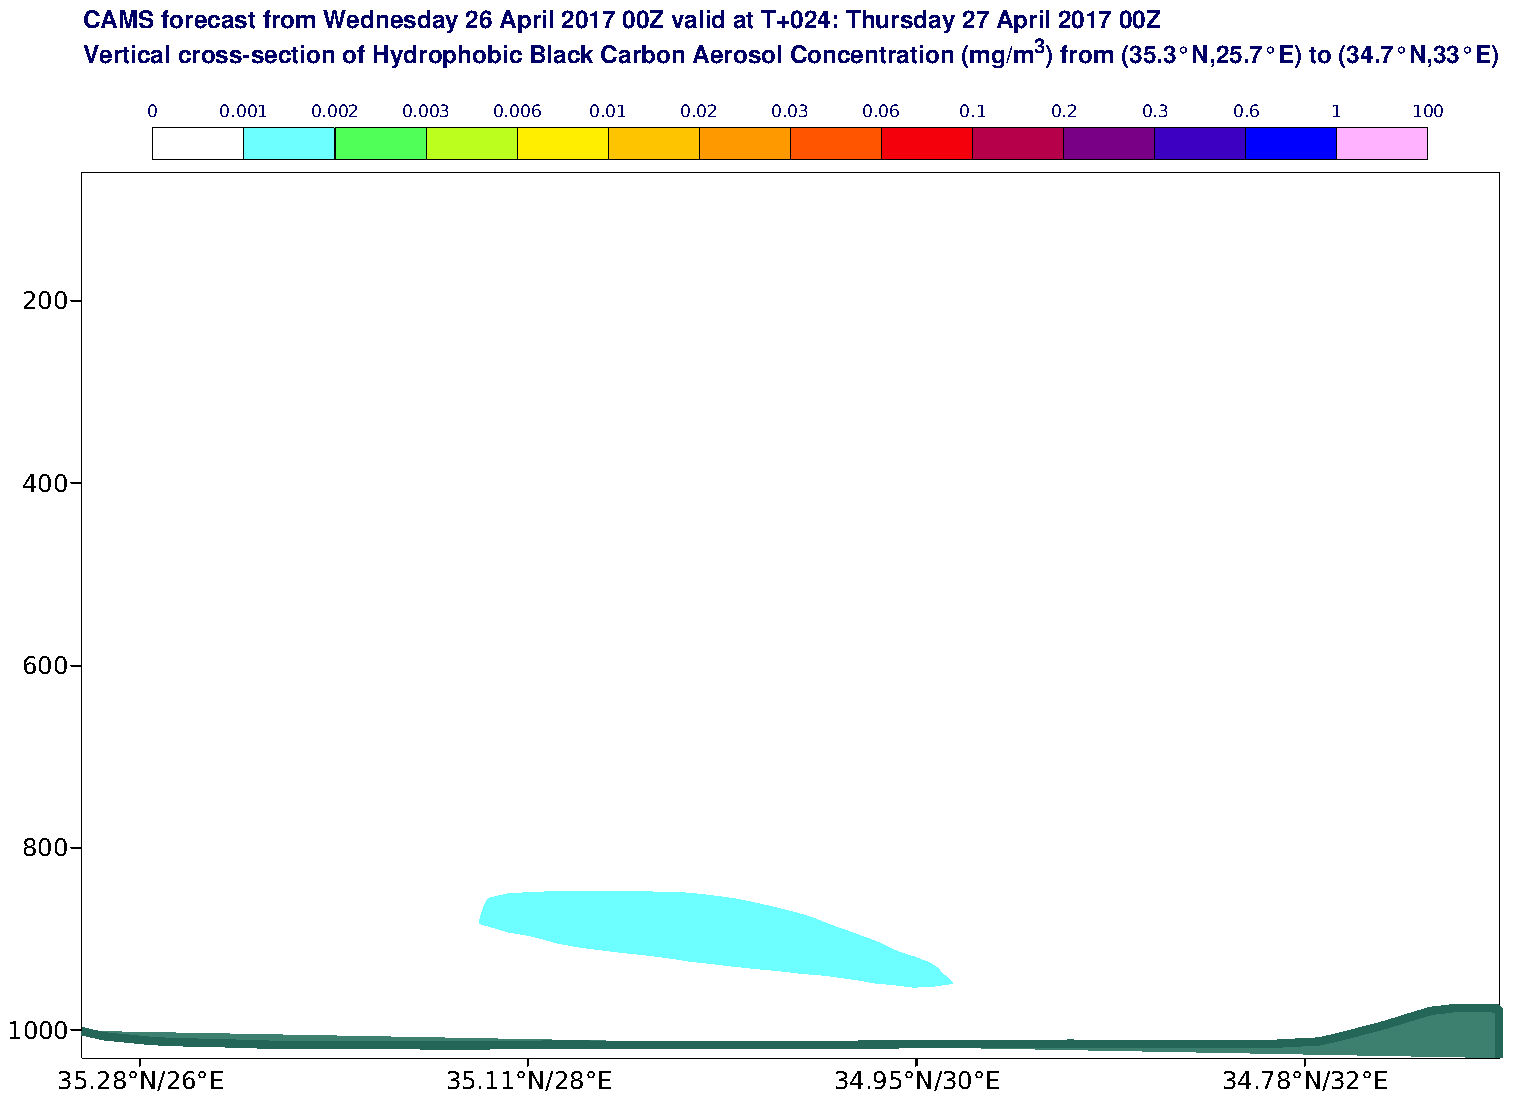 Vertical cross-section of Hydrophobic Black Carbon Aerosol Concentration (mg/m3) valid at T24 - 2017-04-27 00:00